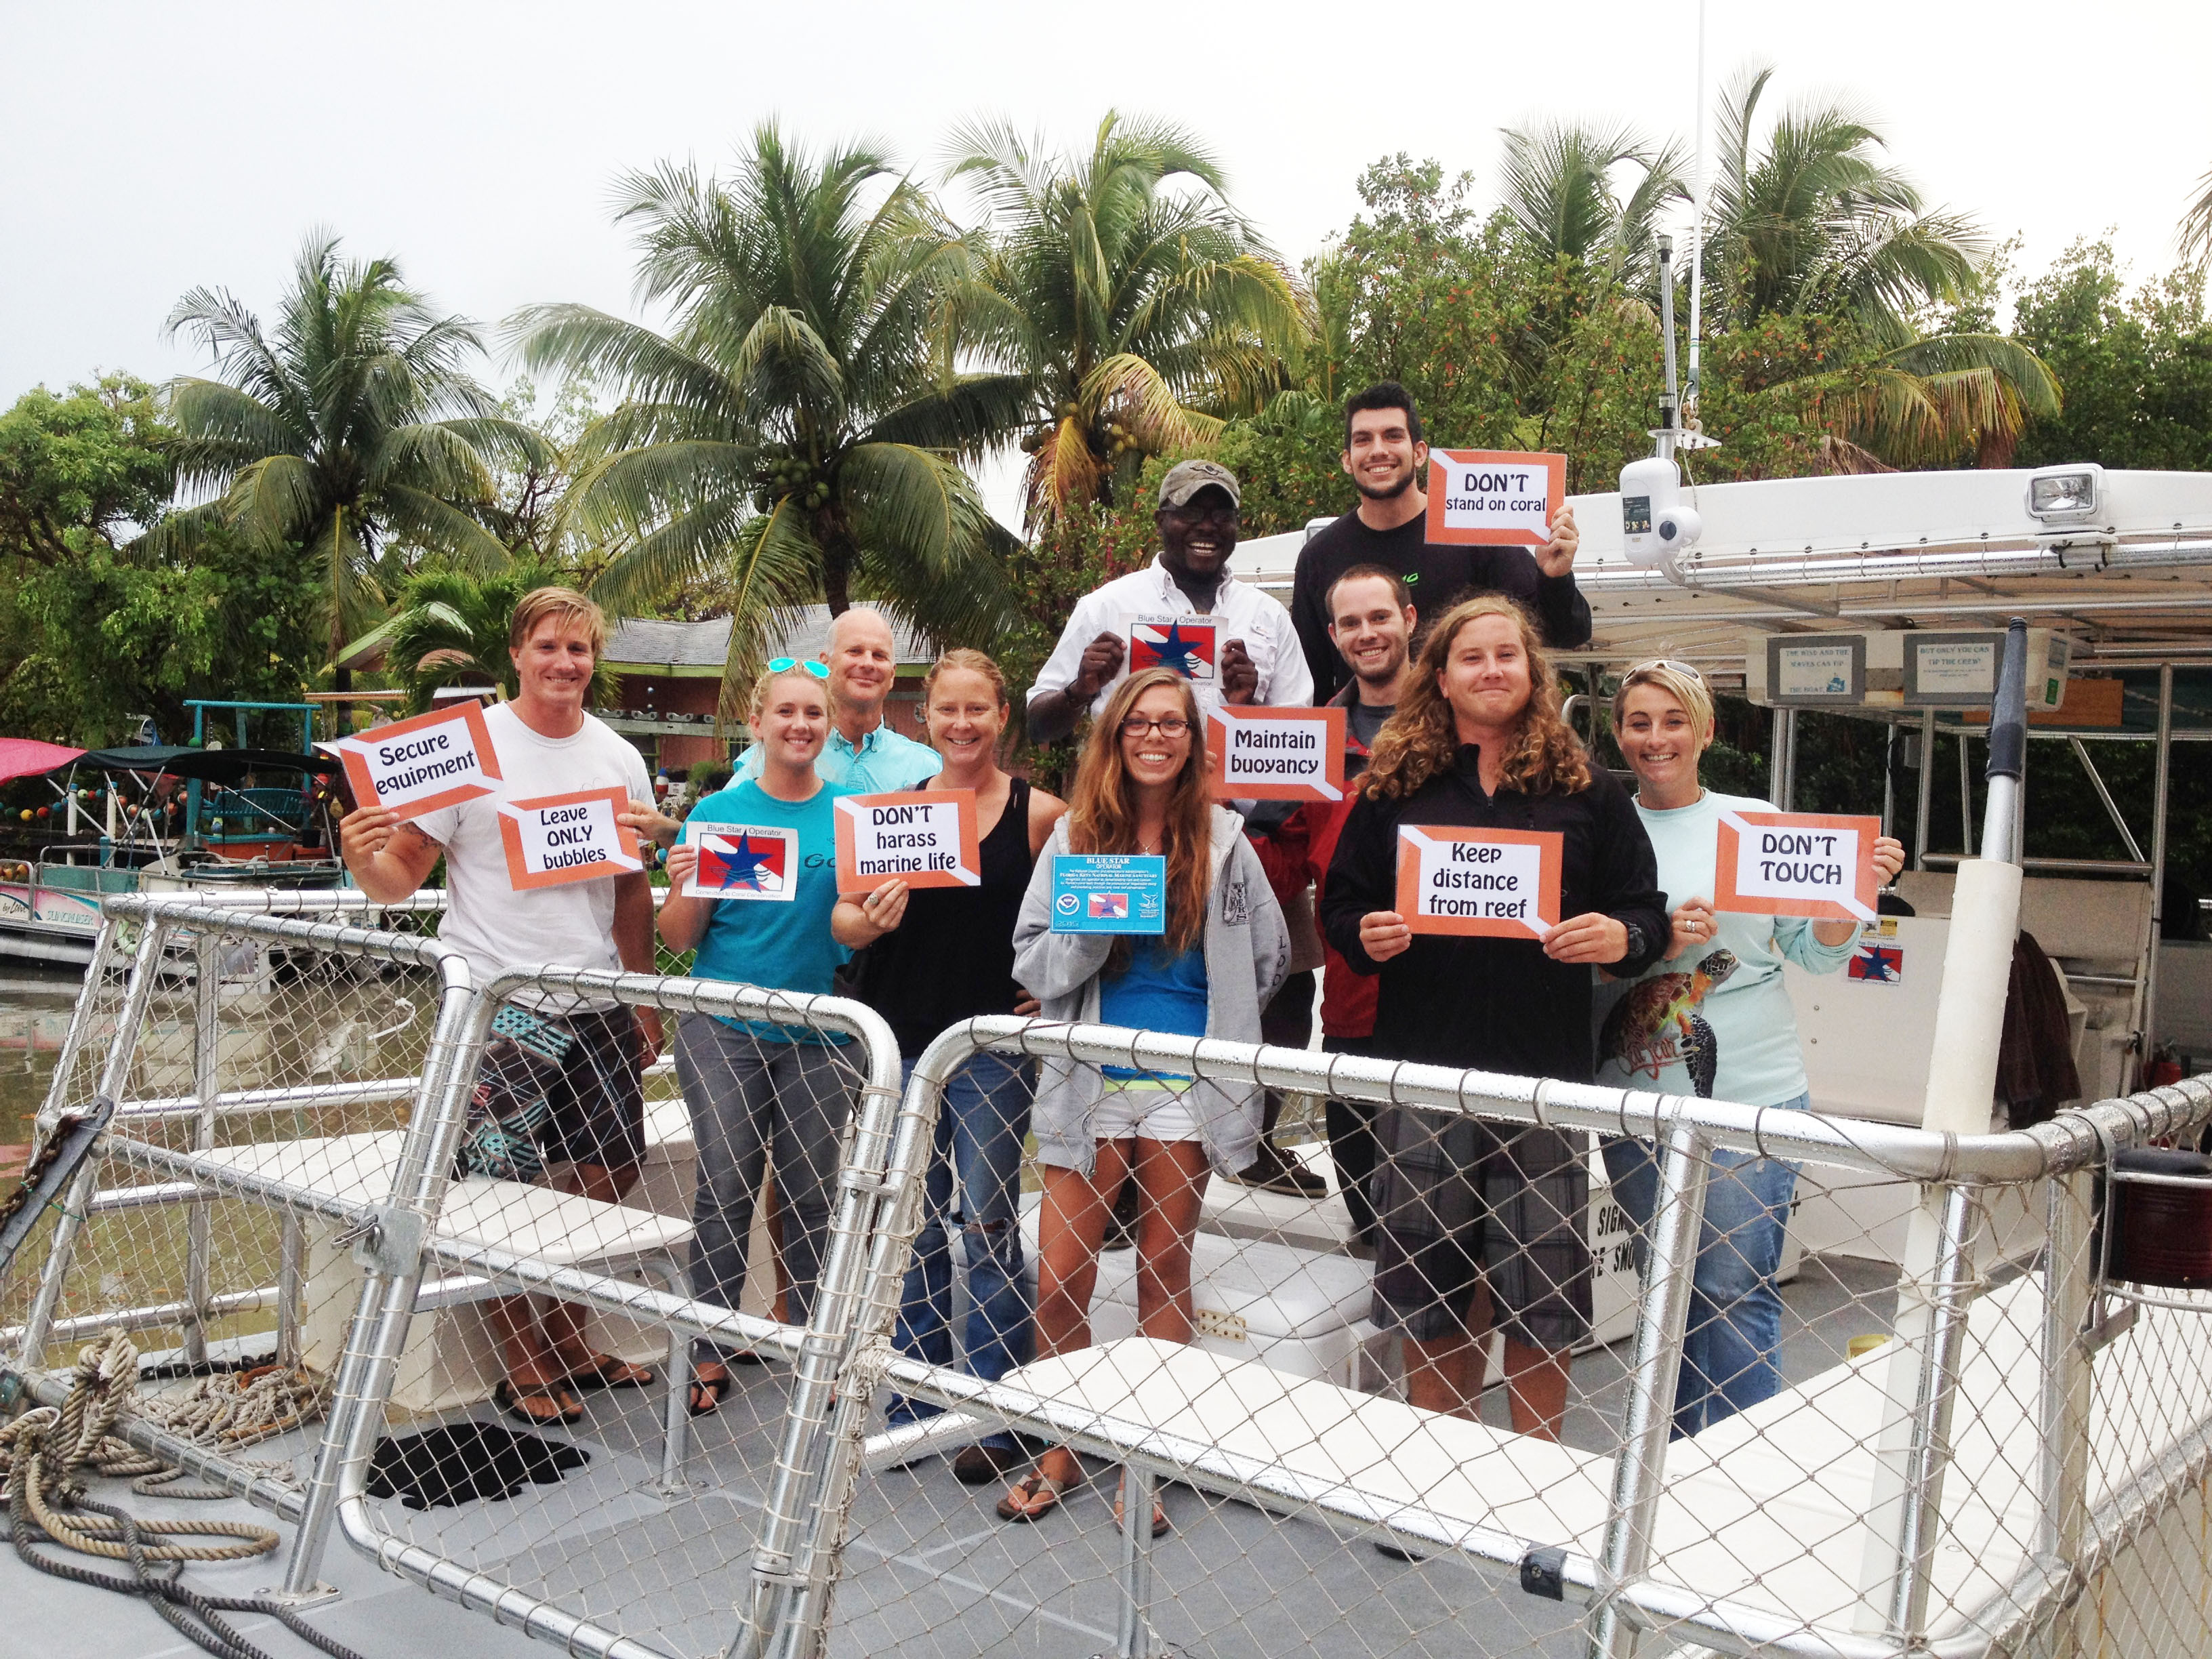 Looe Key Reef Resort and Dive Center Earns Sanctuary’s Blue Star Certification